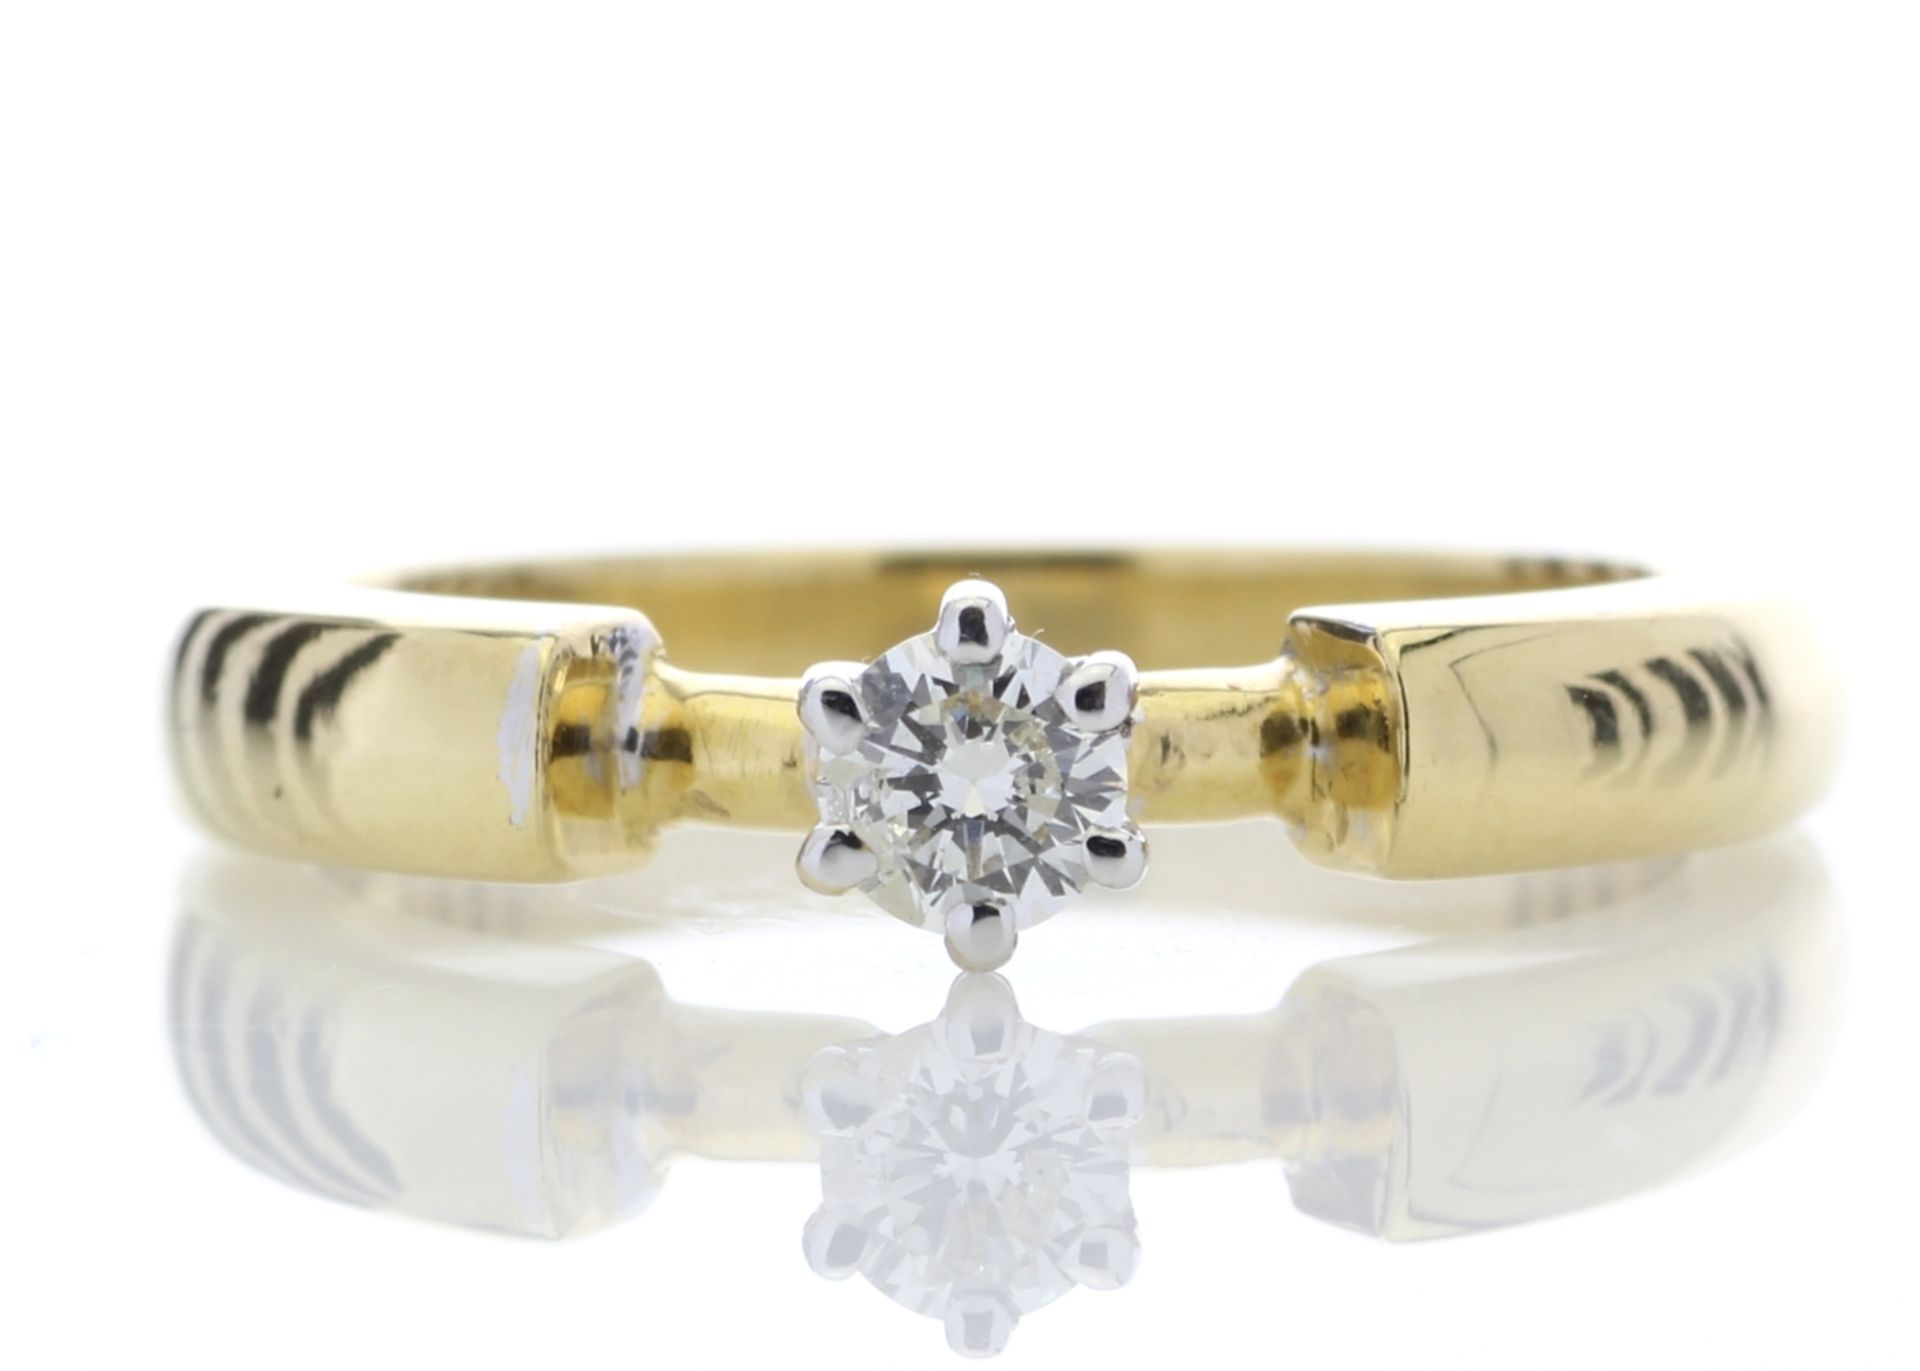 18ct Single Stone Fancy Claw Set Diamond Ring 0.20 Carats - Valued By GIE £7,595.00 - A beautiful